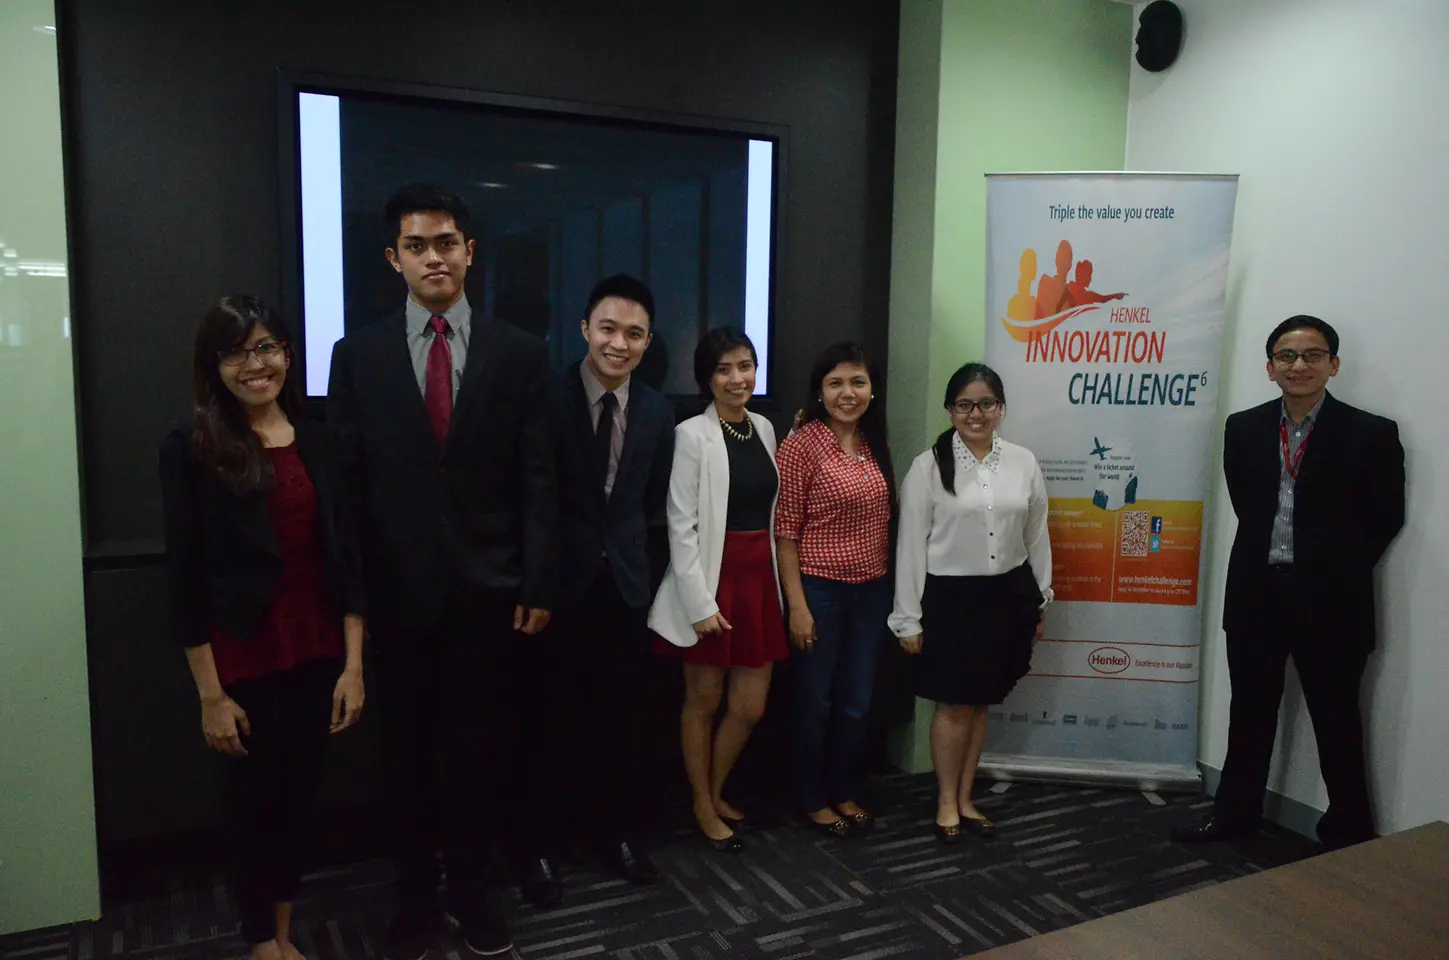 
Semi-finalists for HIC Philippines. Winners Christine Darla Bautista and Marco del Valle (first and second from left) came up with a coating innovation which protects cars from corrosion and transforms any surface into a powerful solar cell